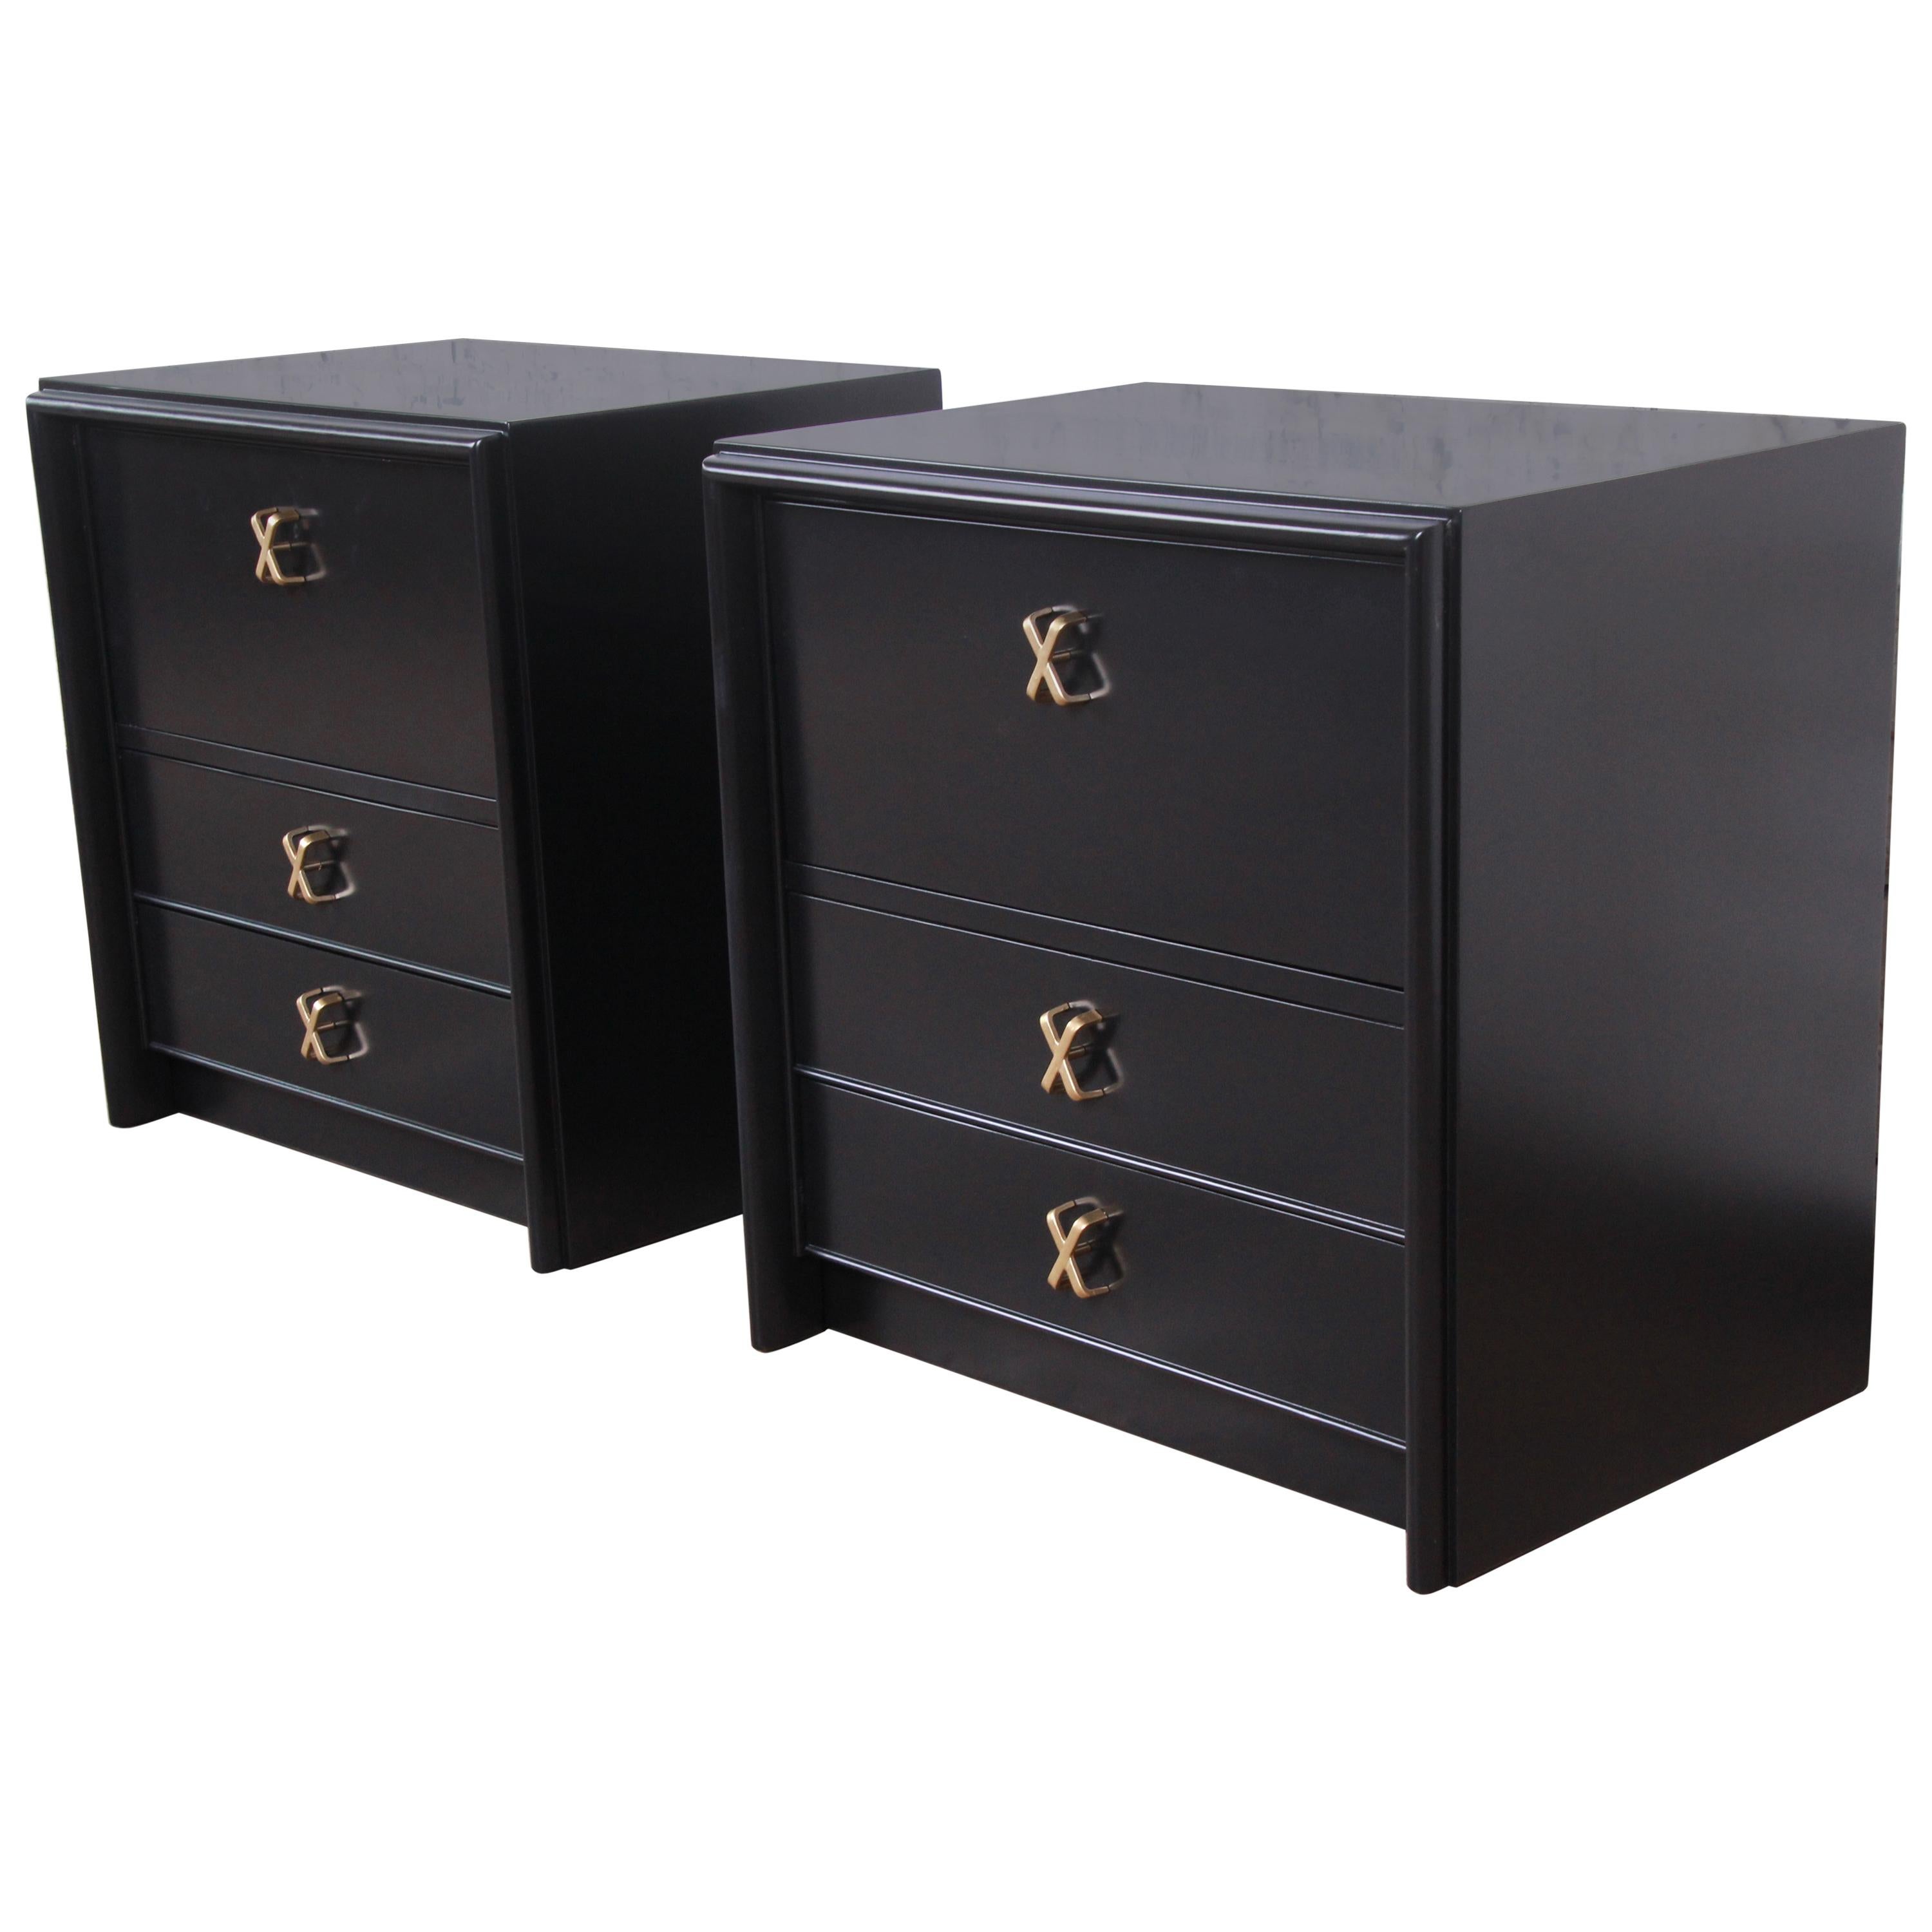 Paul Frankl for Johnson Furniture Black Lacquered Nightstands, Newly Refinished